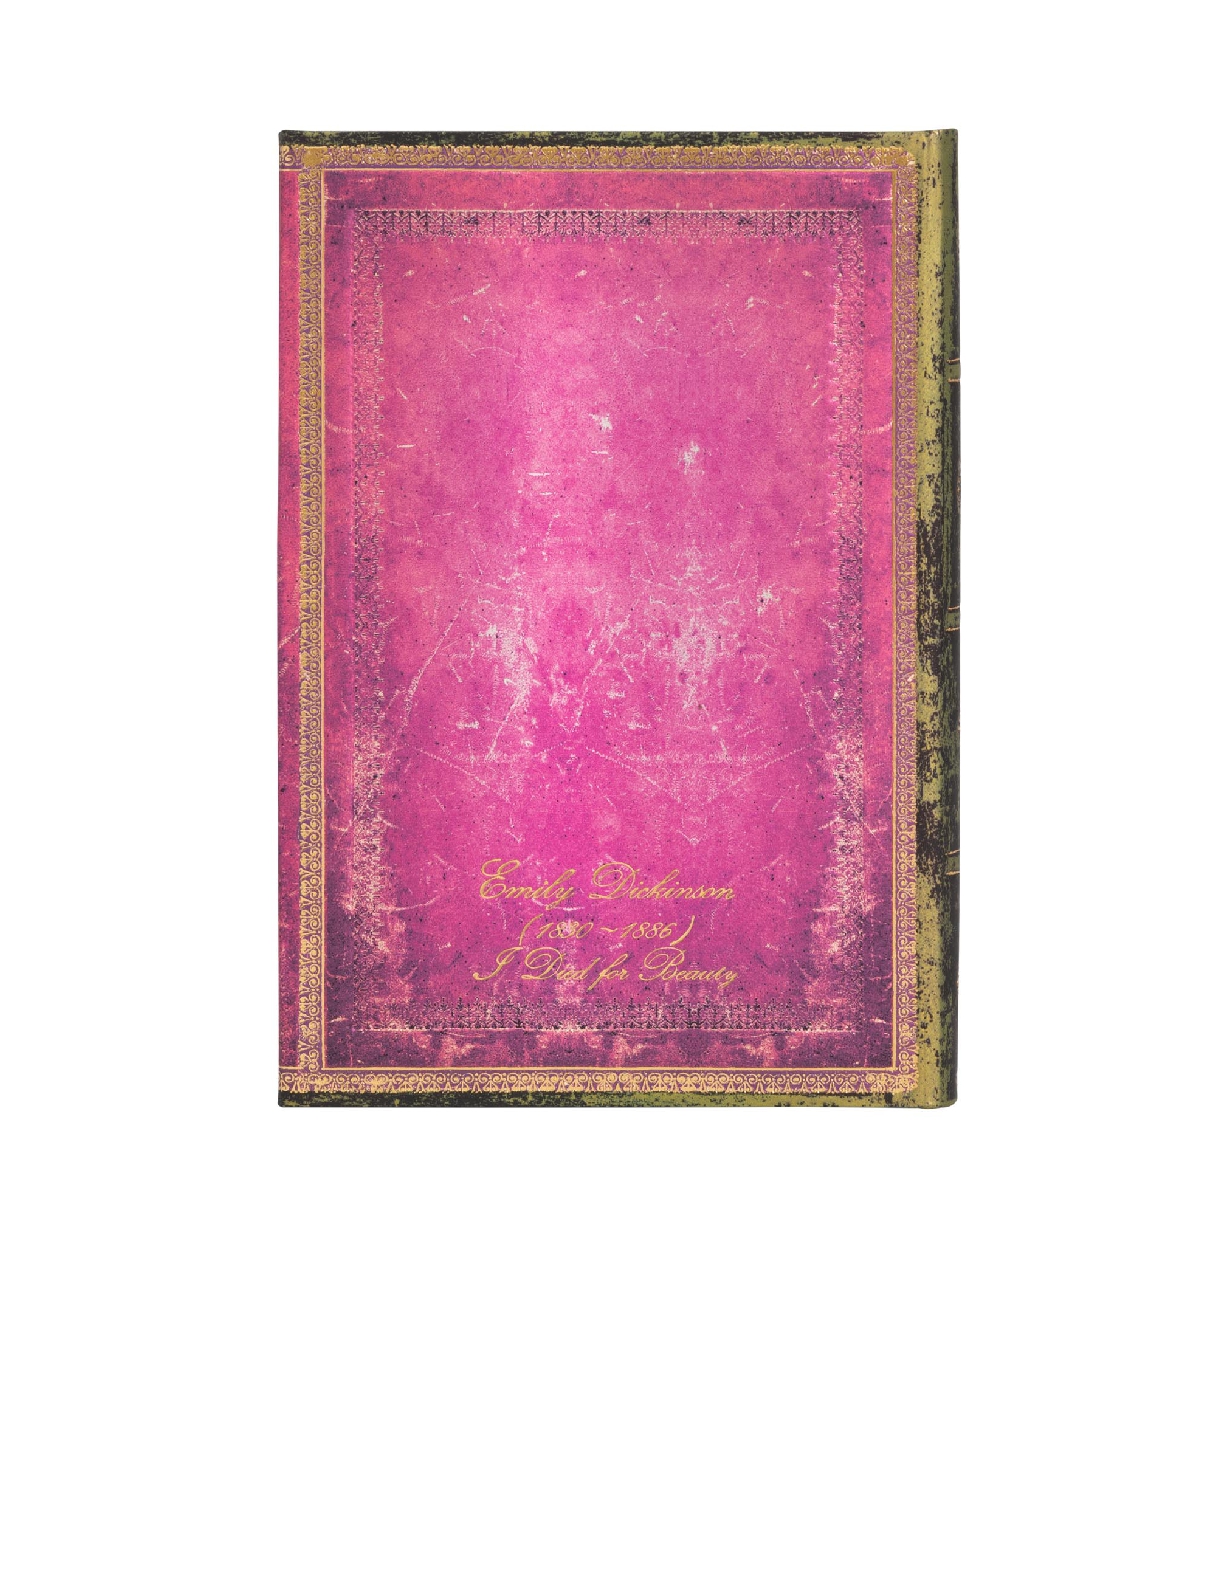 Emily Dickinson, I Died for Beauty, Embellished Manuscripts Collection, Hardcover, Mini, Lined, Wrap Closure, 176 Pg, 85 GSM